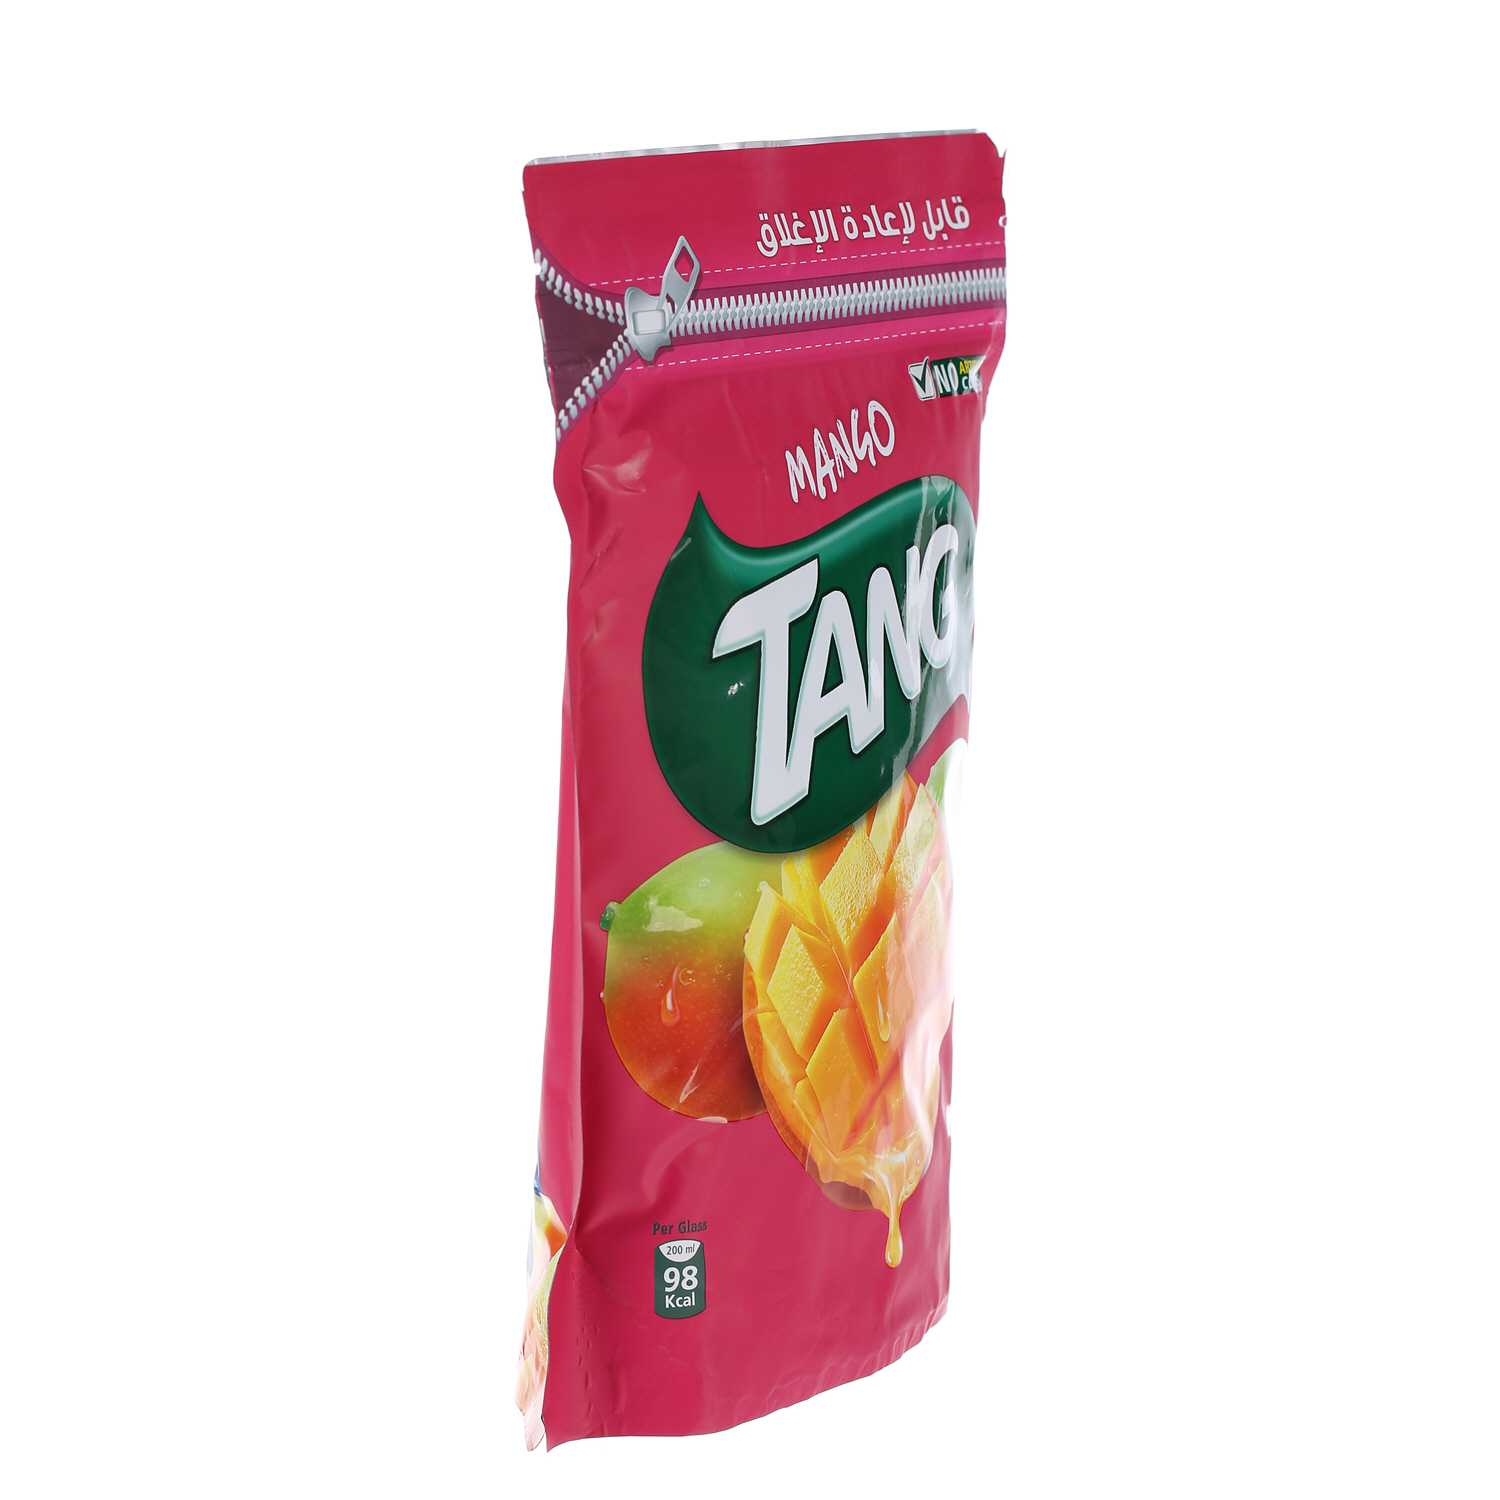 Tang Instant Drink Mango Pouch 1Kg